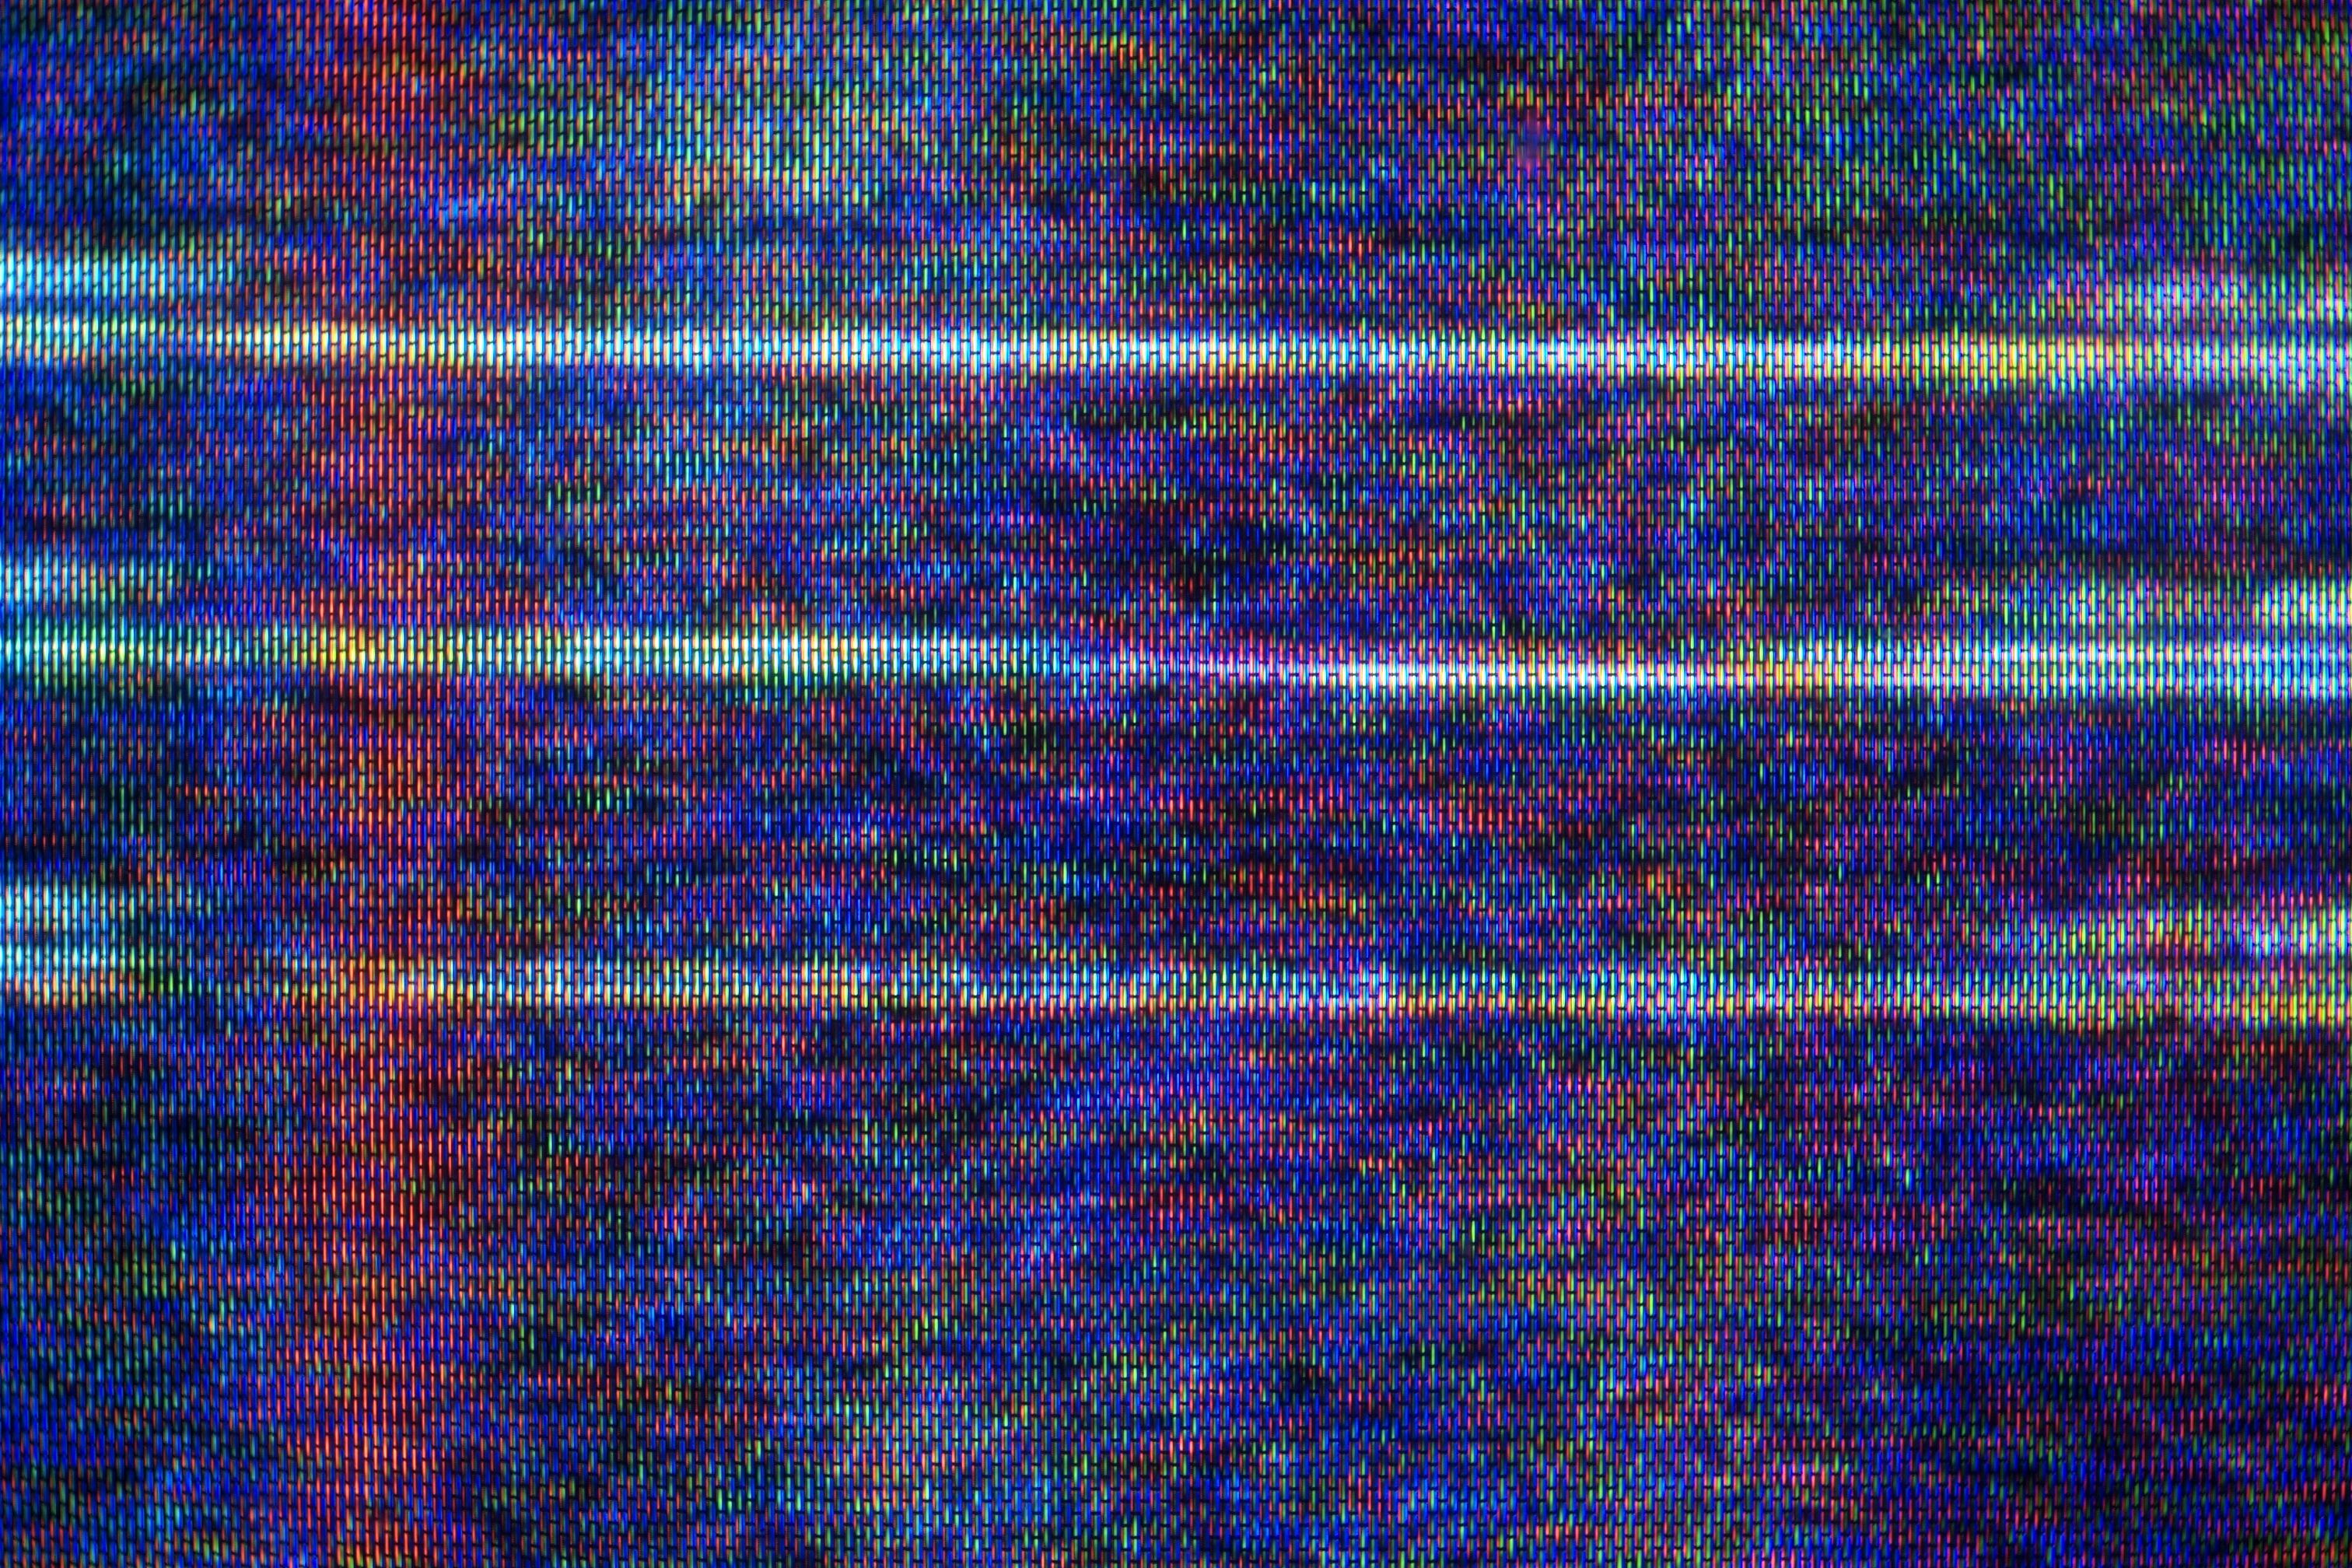 Tv Static Wallpaper Find The Best Free Stock Images About Tv Static Handmade By Zurek